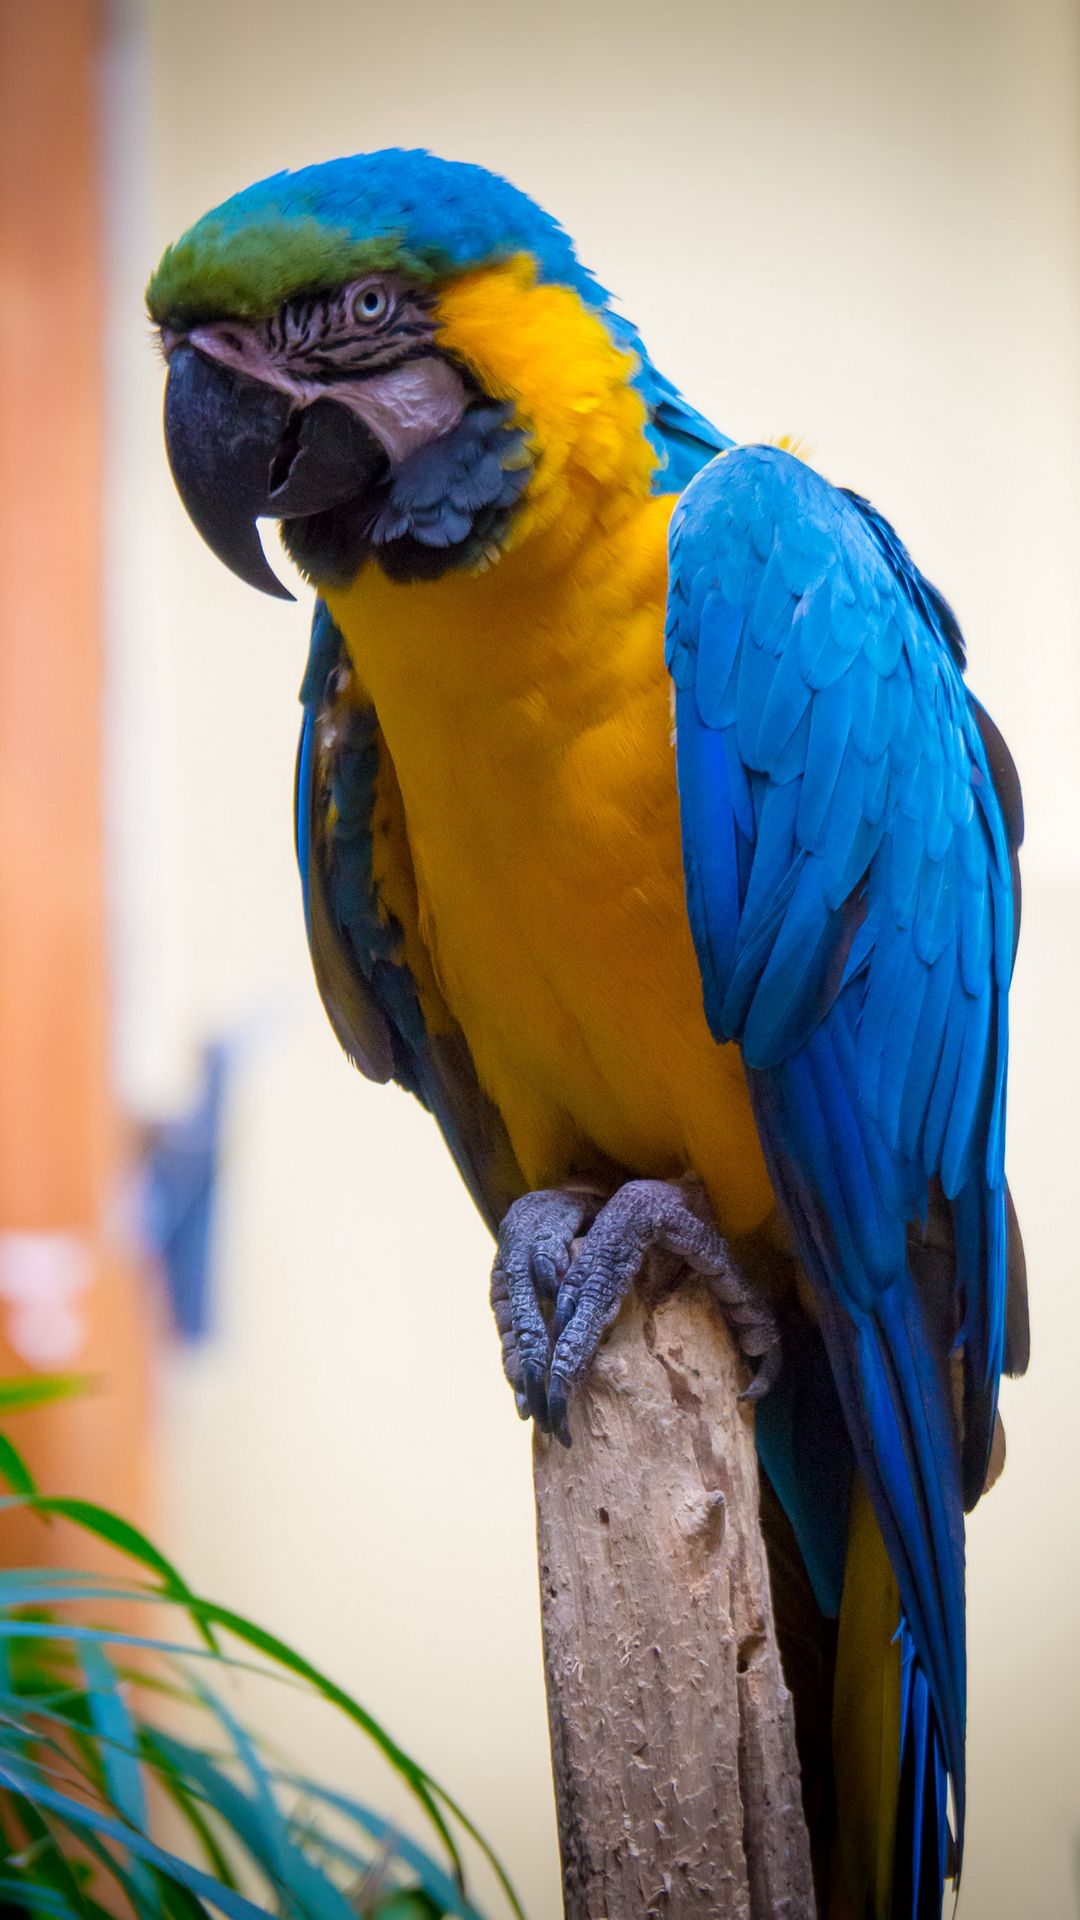 Download Wallpaper 1080x1920 Macaw Parrot Bird Feathers Bright